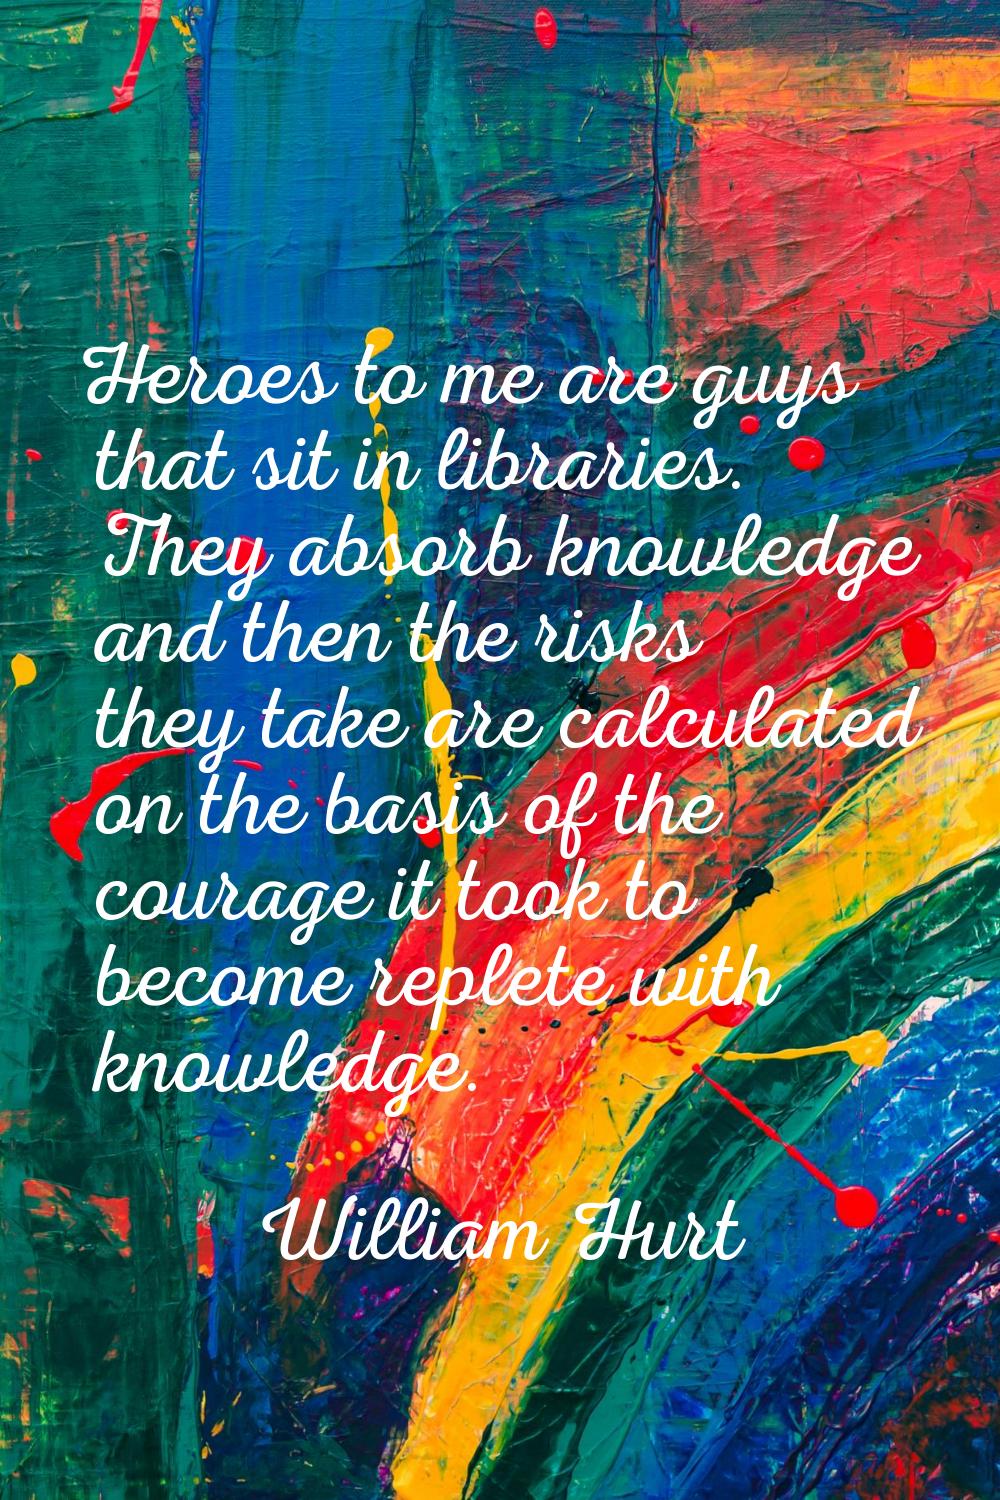 Heroes to me are guys that sit in libraries. They absorb knowledge and then the risks they take are